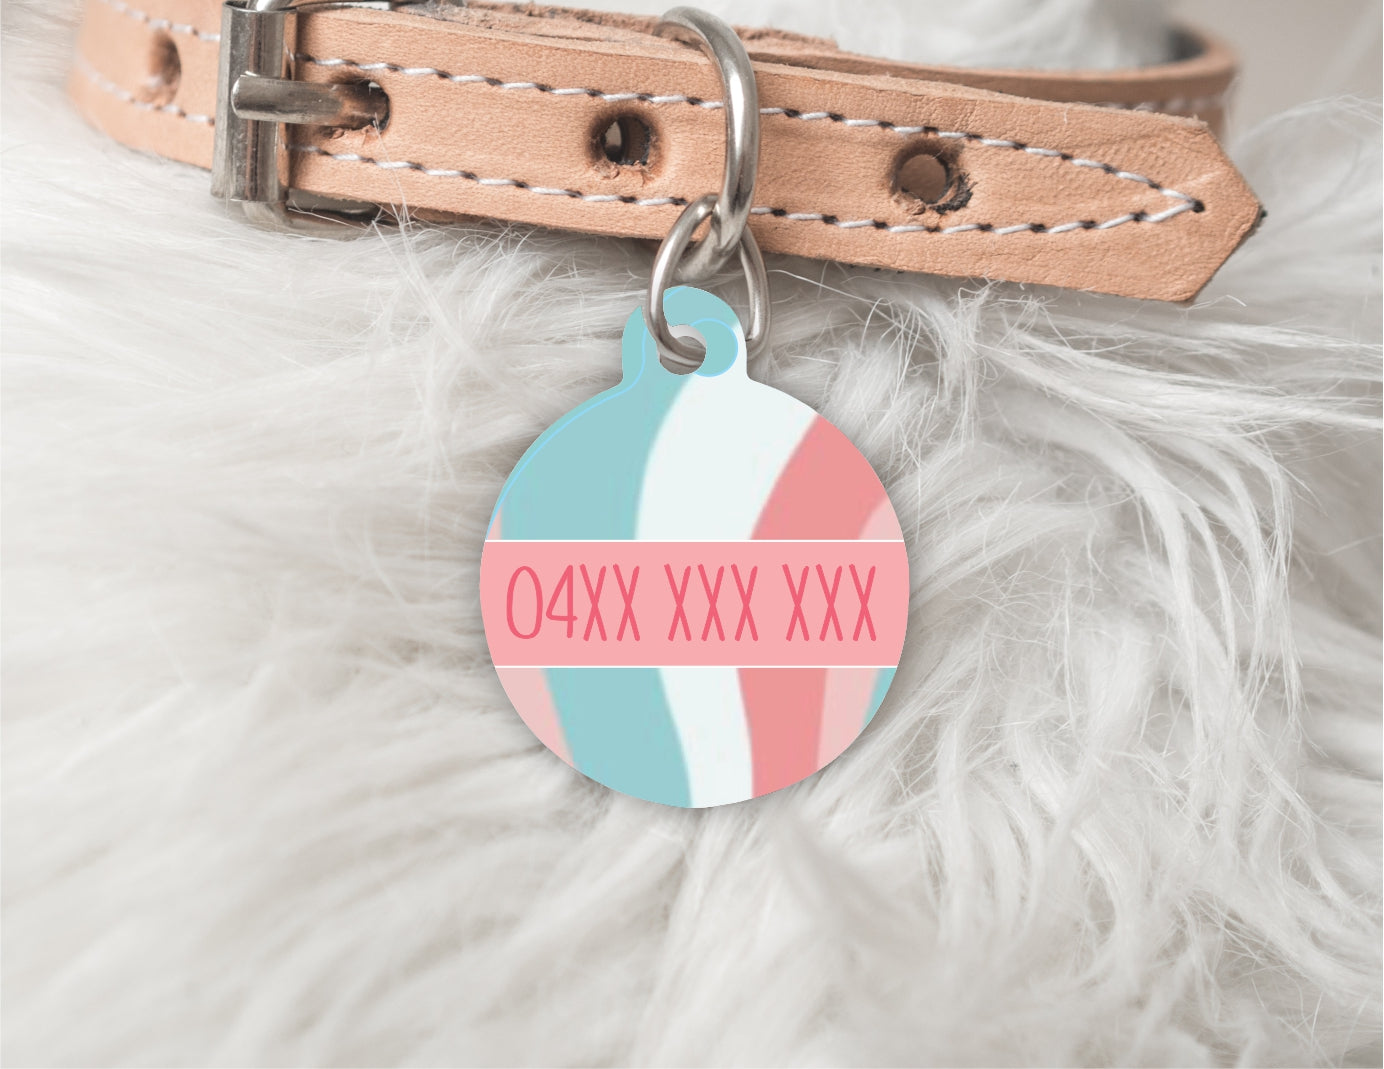 The Coco- Double sided Pet dog or cat ID Tag